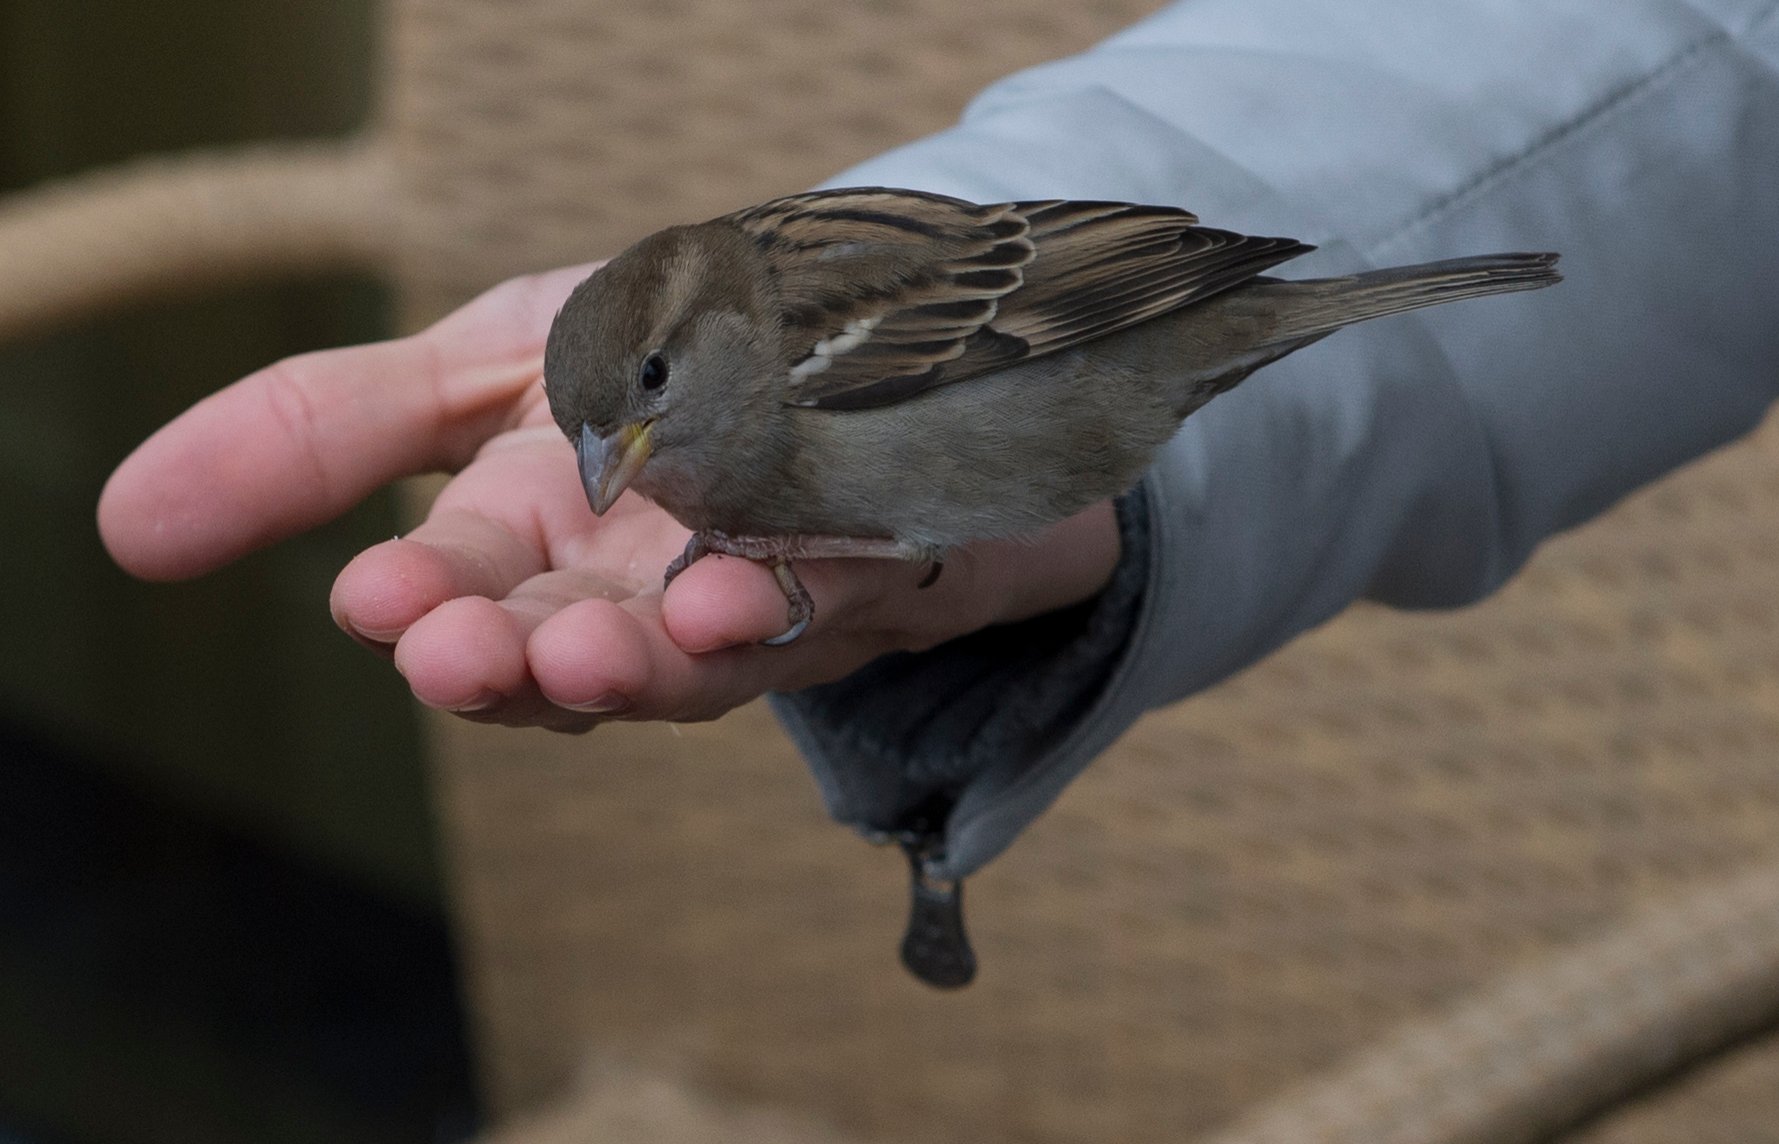 Sparrows land on a woman's hand to pick up bread crumbs in Berlin.